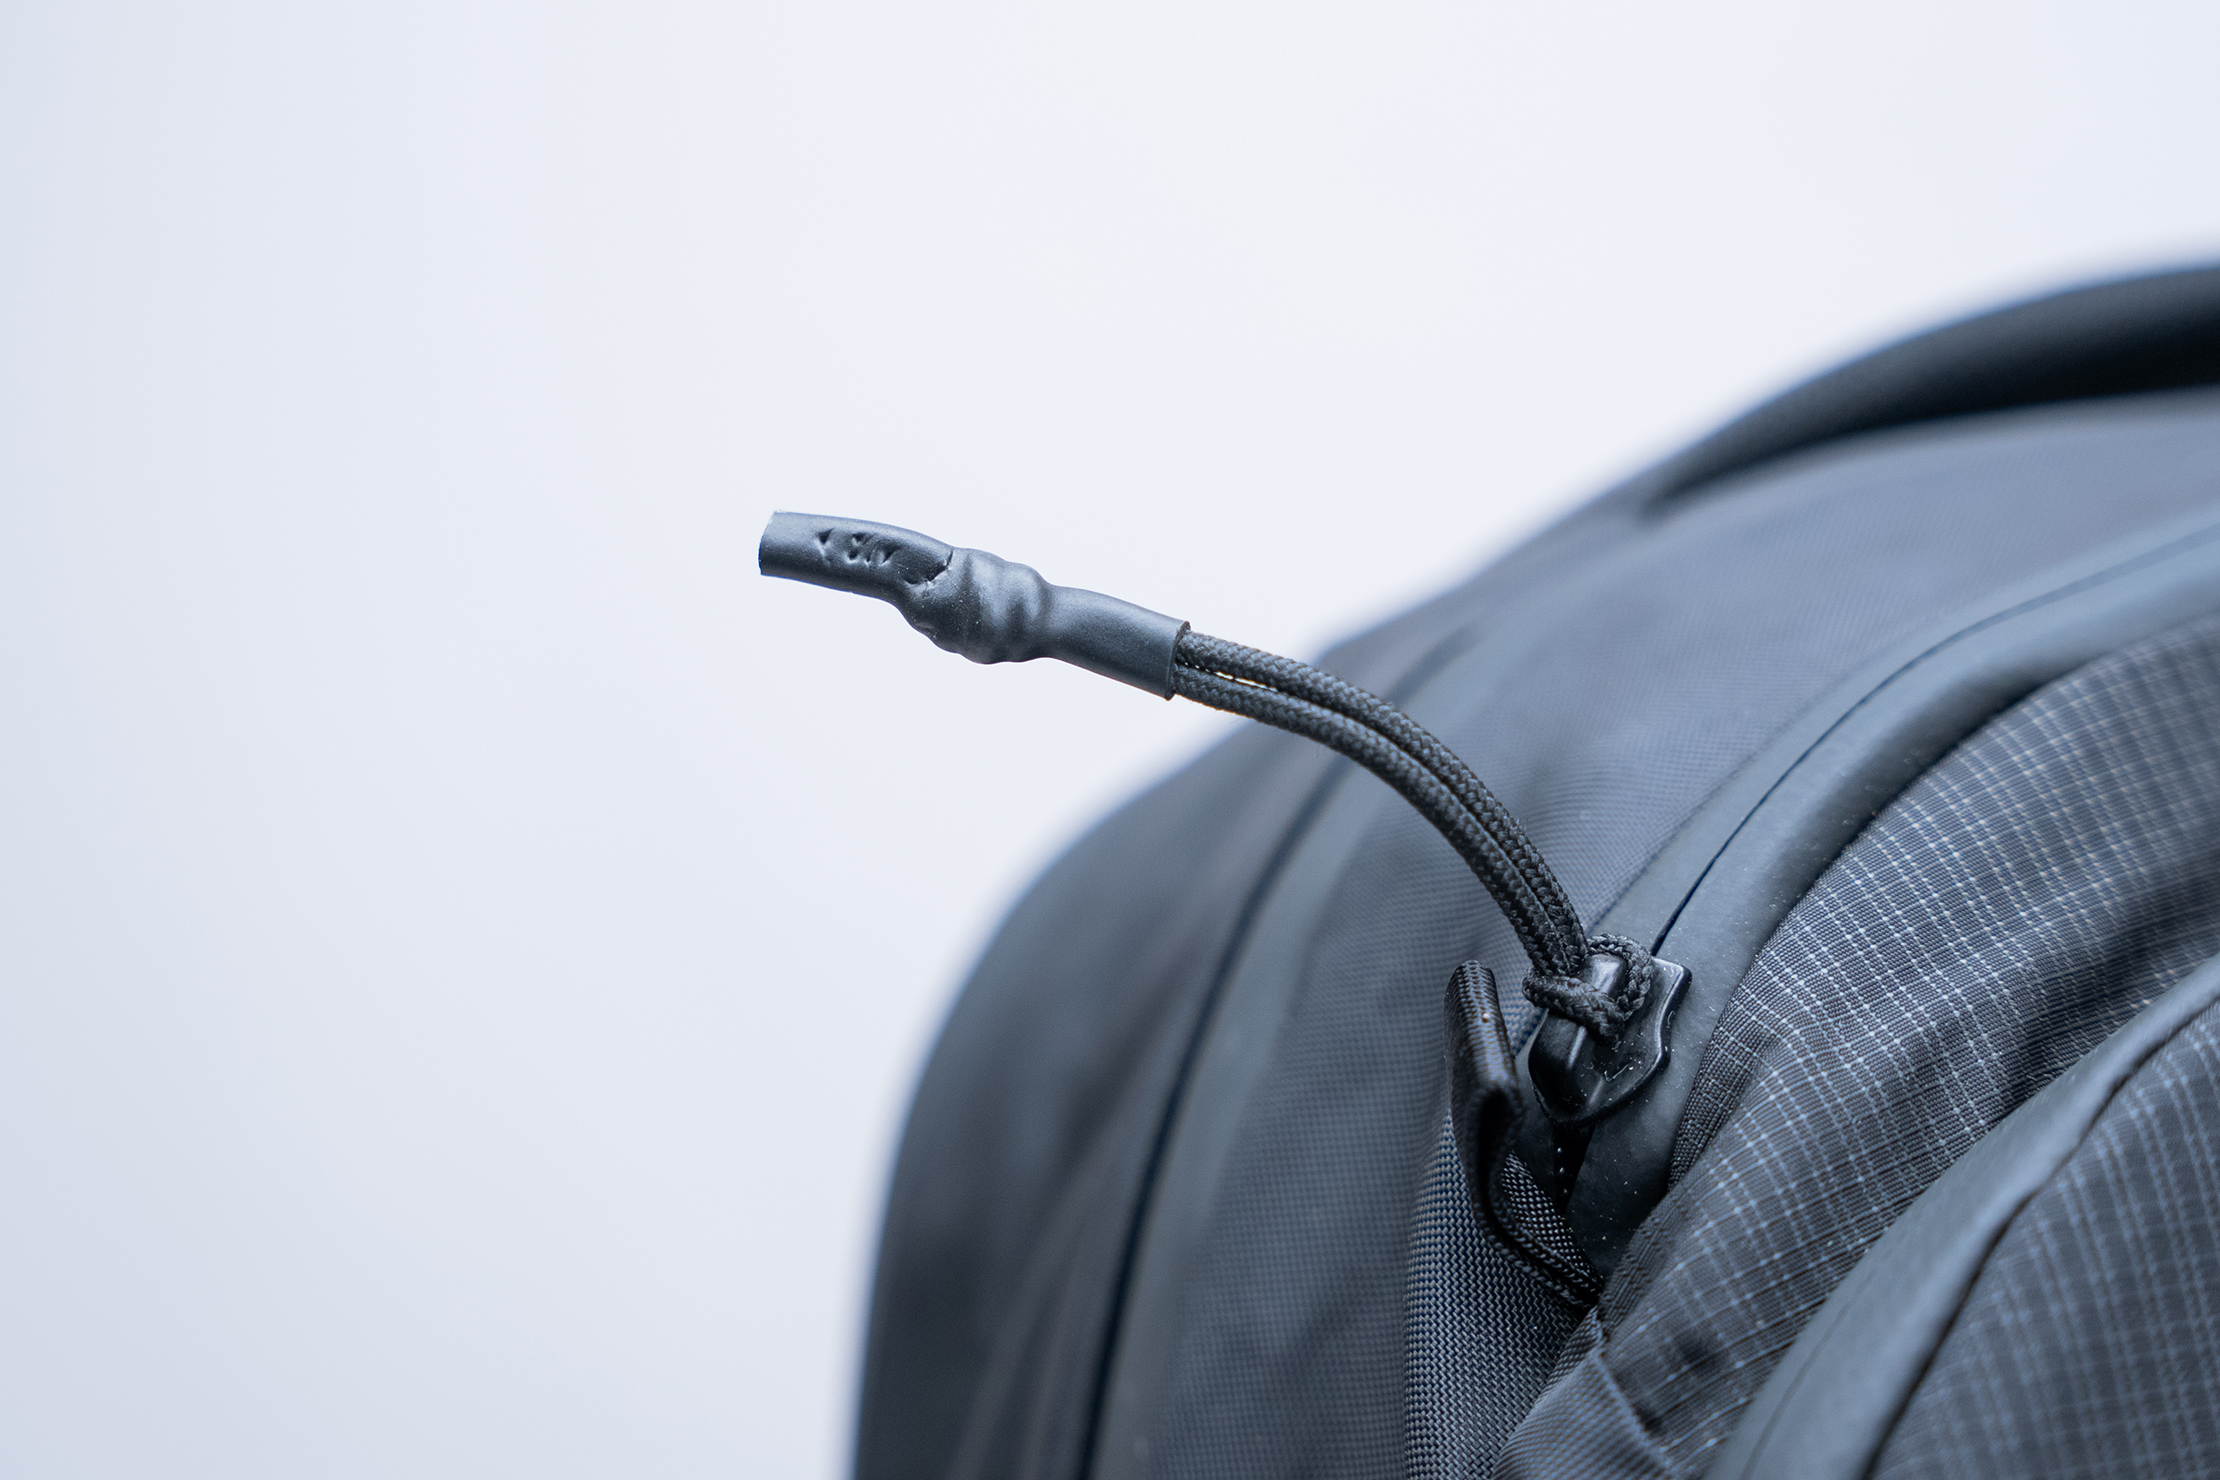 Osprey Ozone Laptop Backpack Review